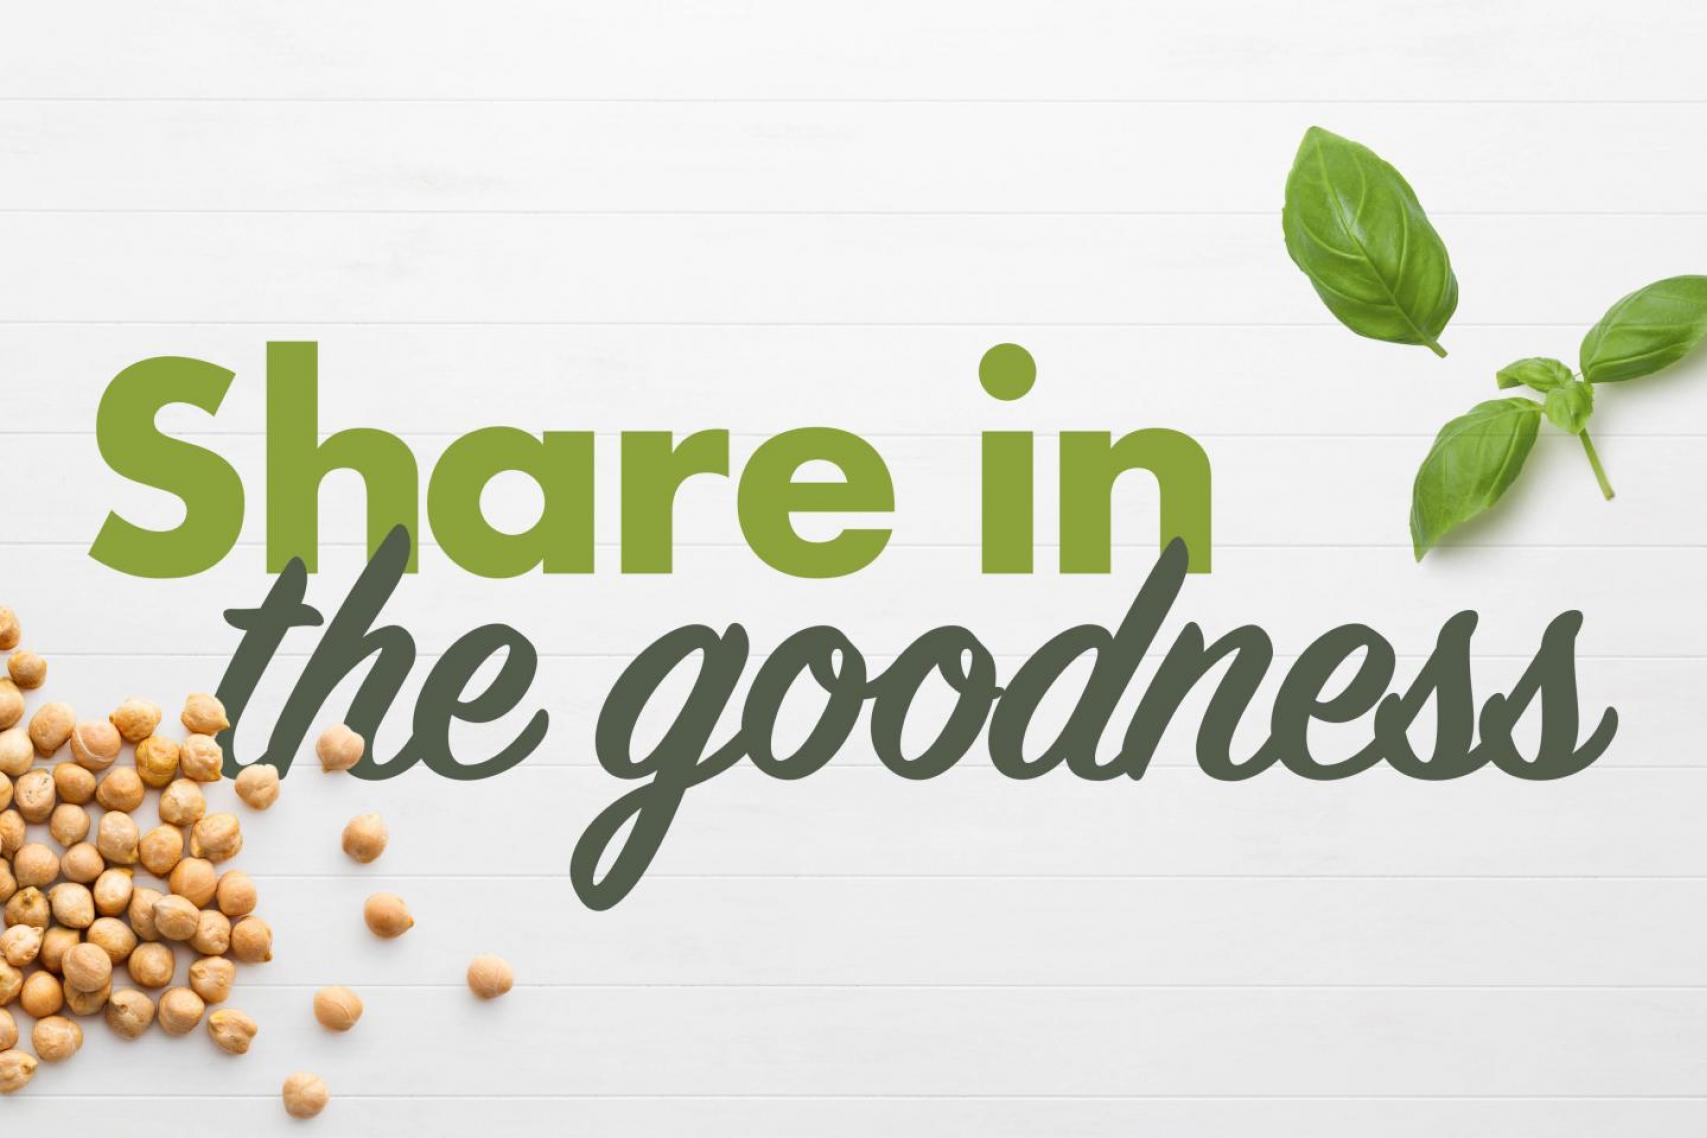 Share in the goodness